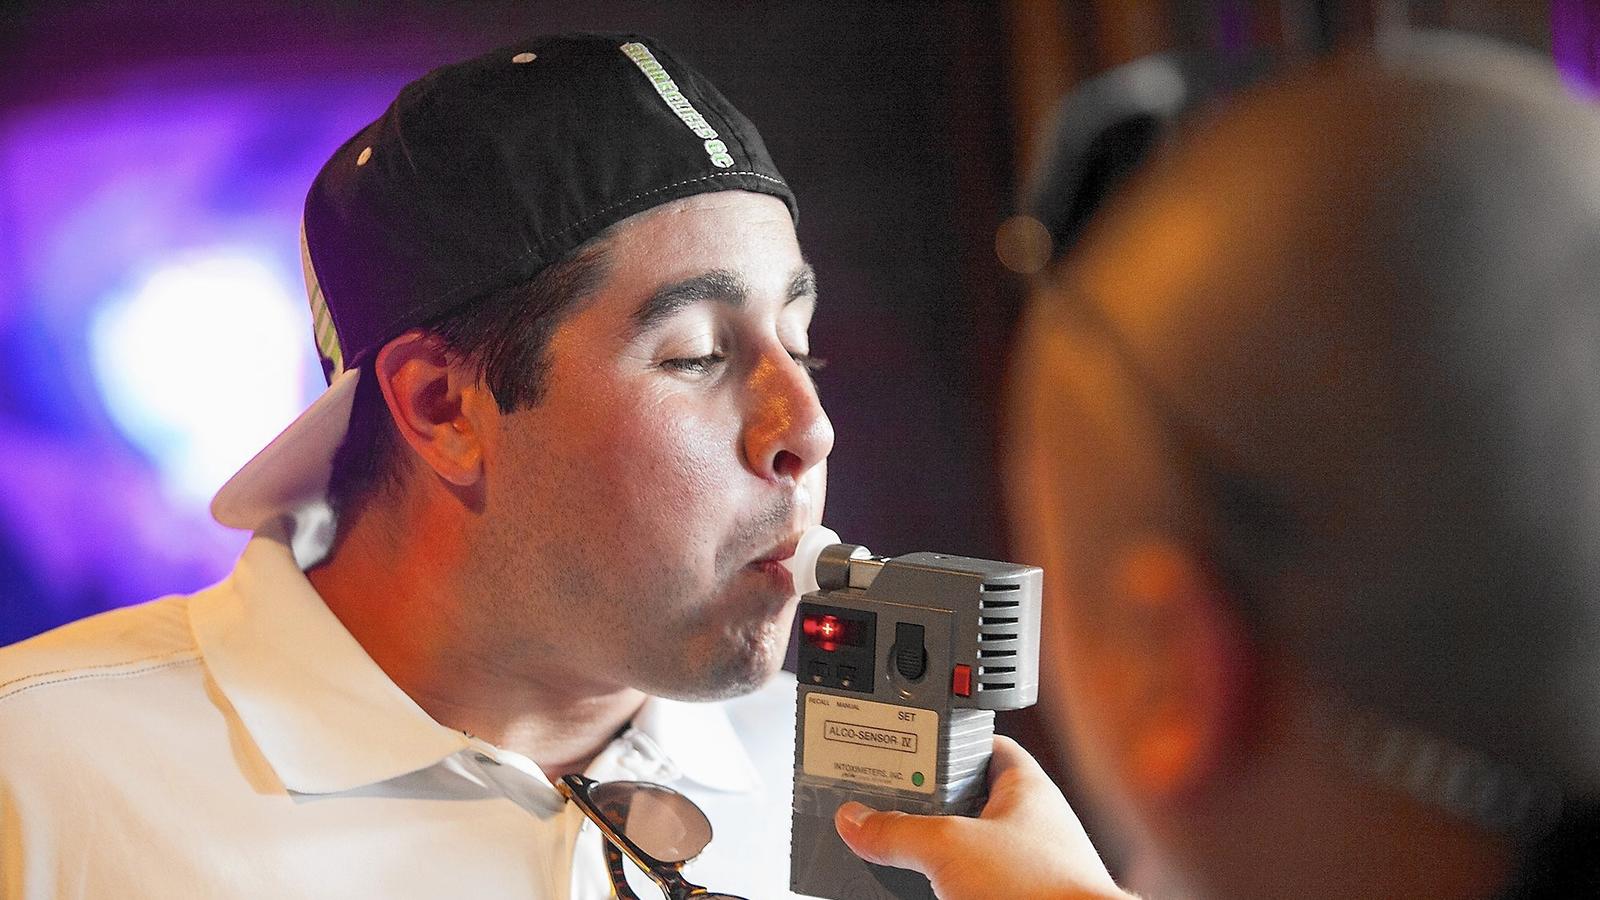 How to beat a breathalyzer test